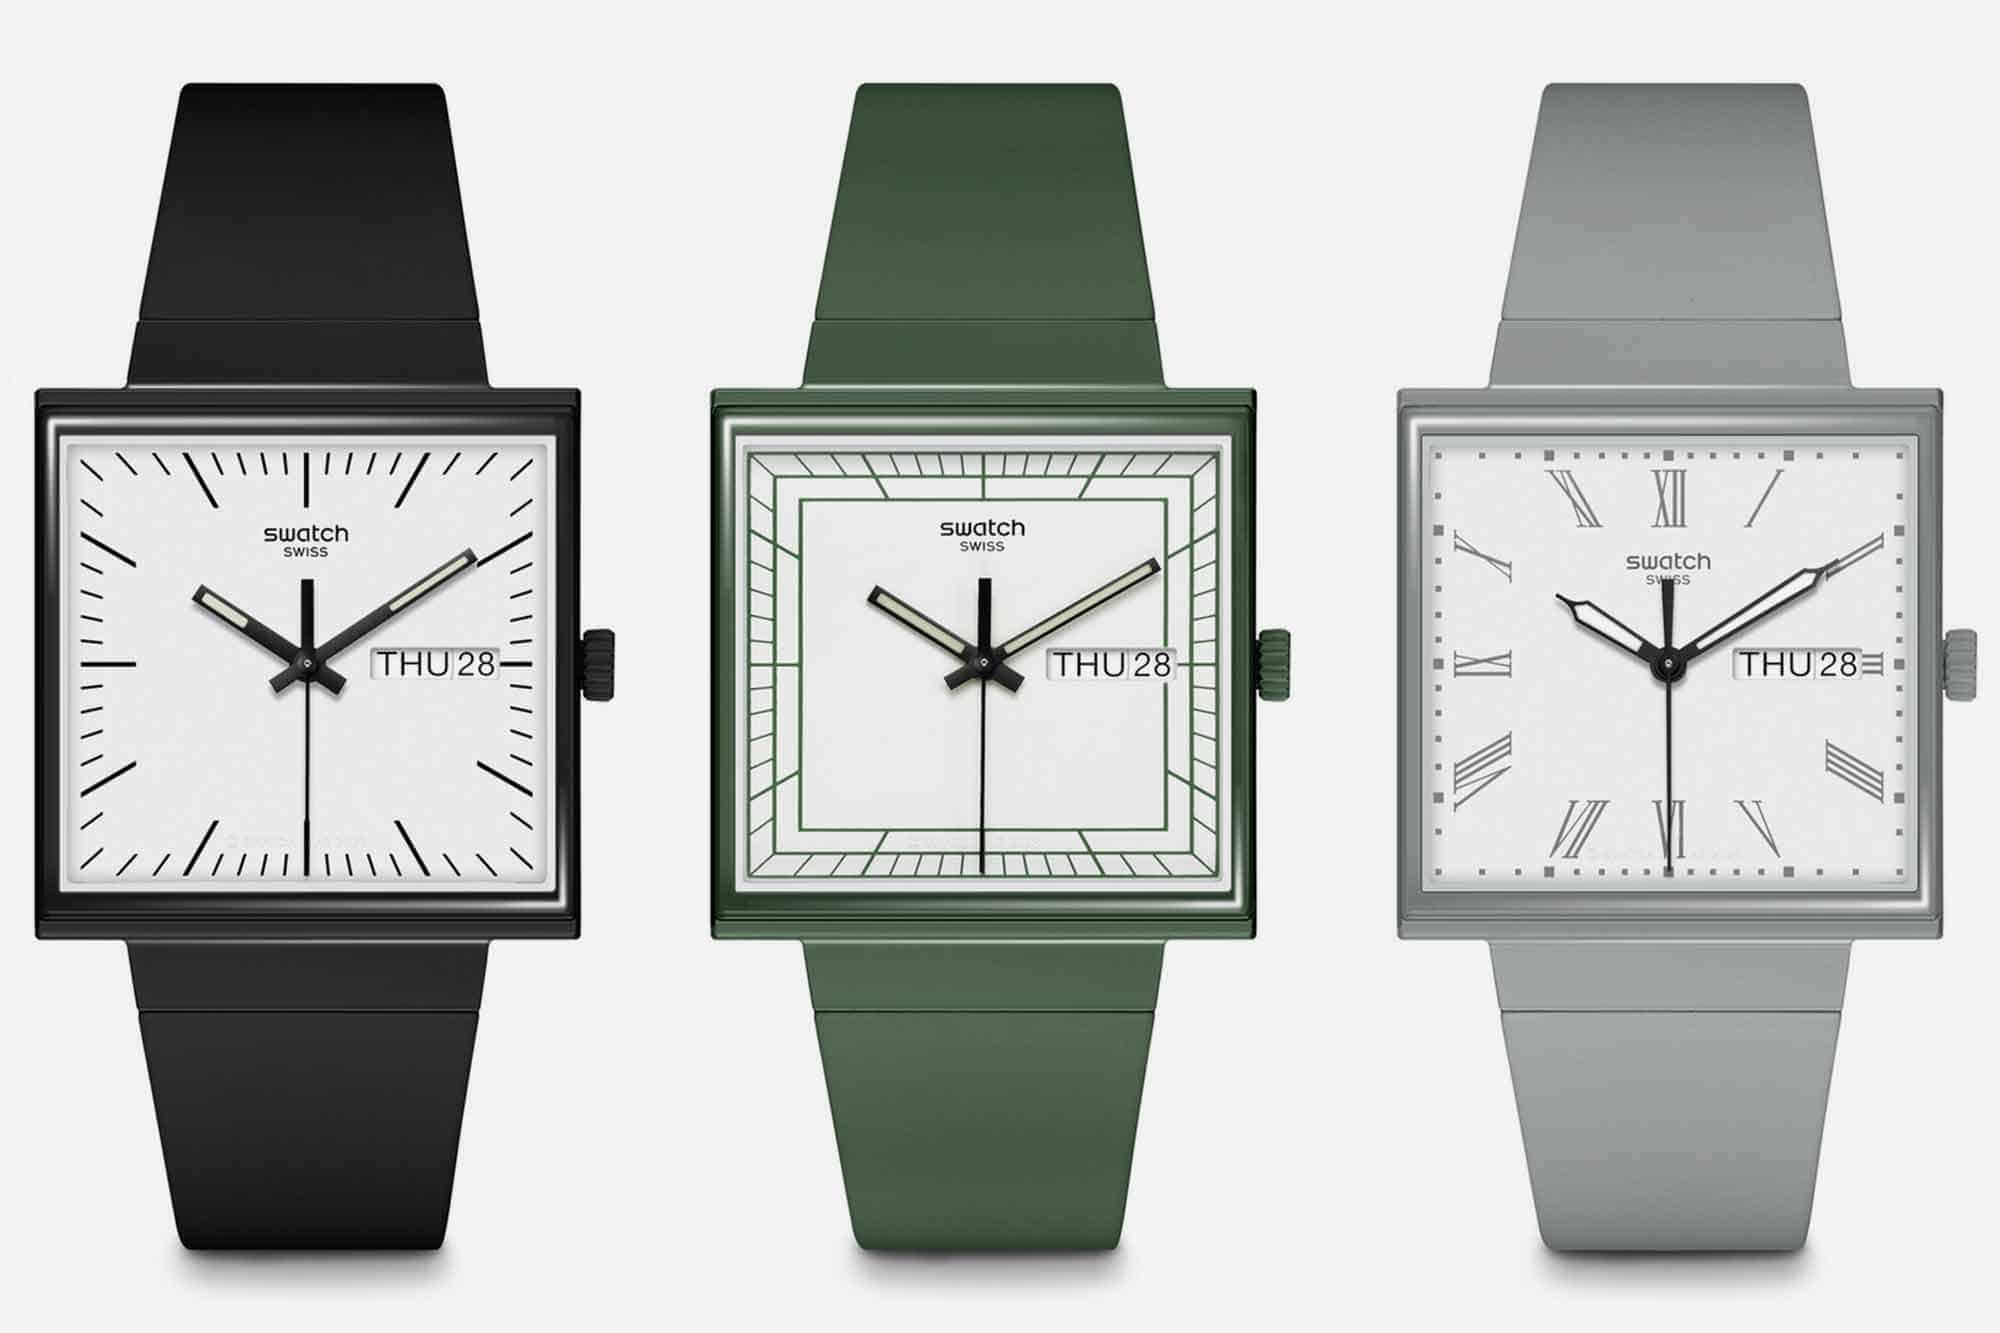 Swatch Asks What If? with their New Collection of Square